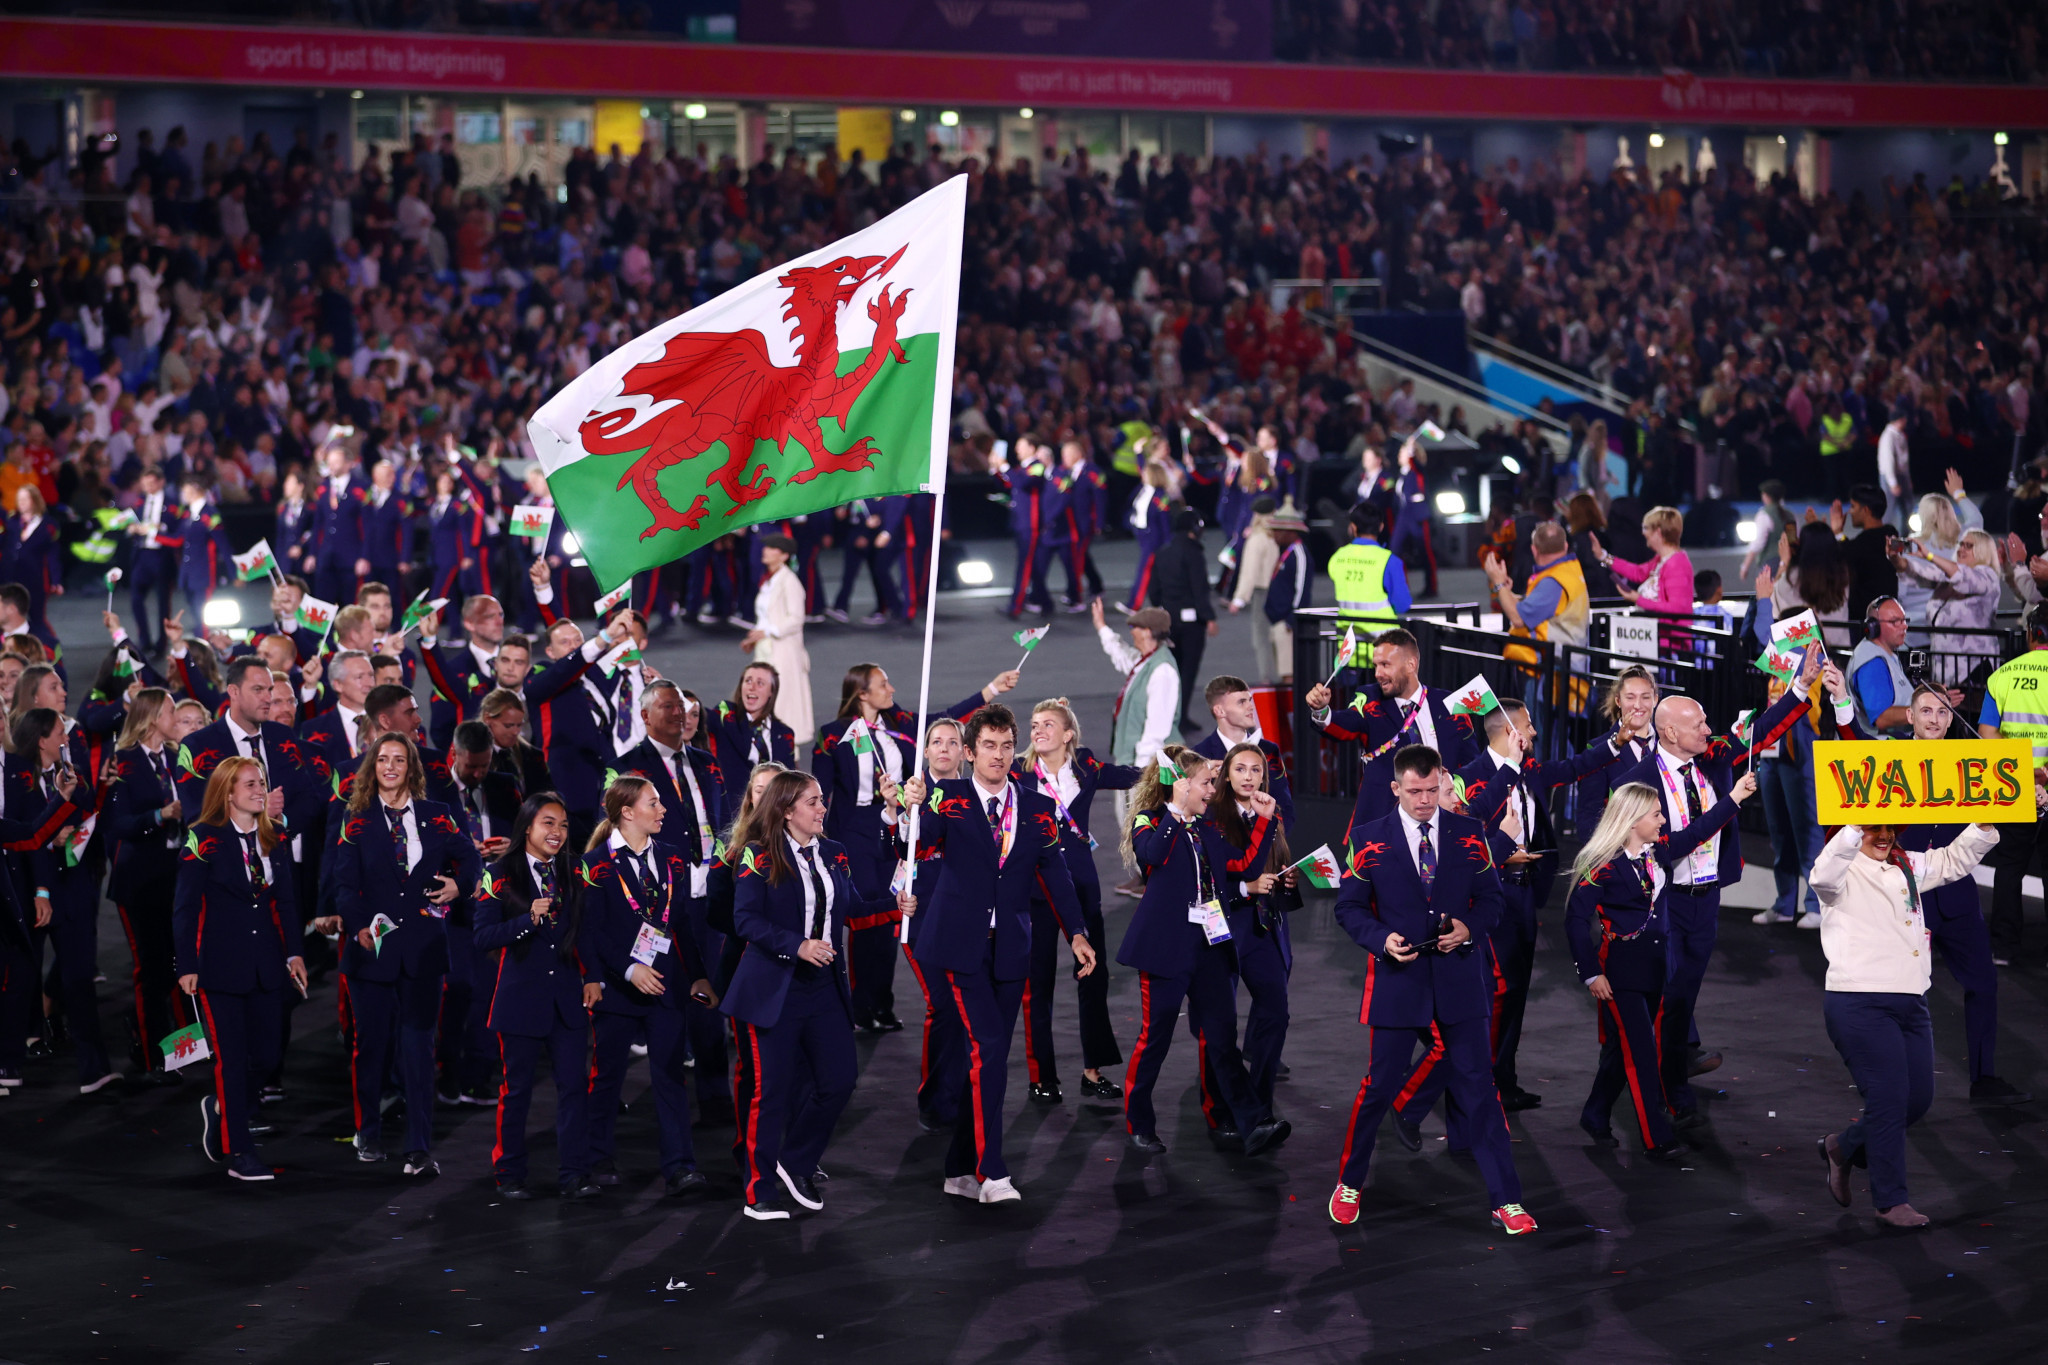 Commonwealth Games Wales opens application process for Athletes' Commission